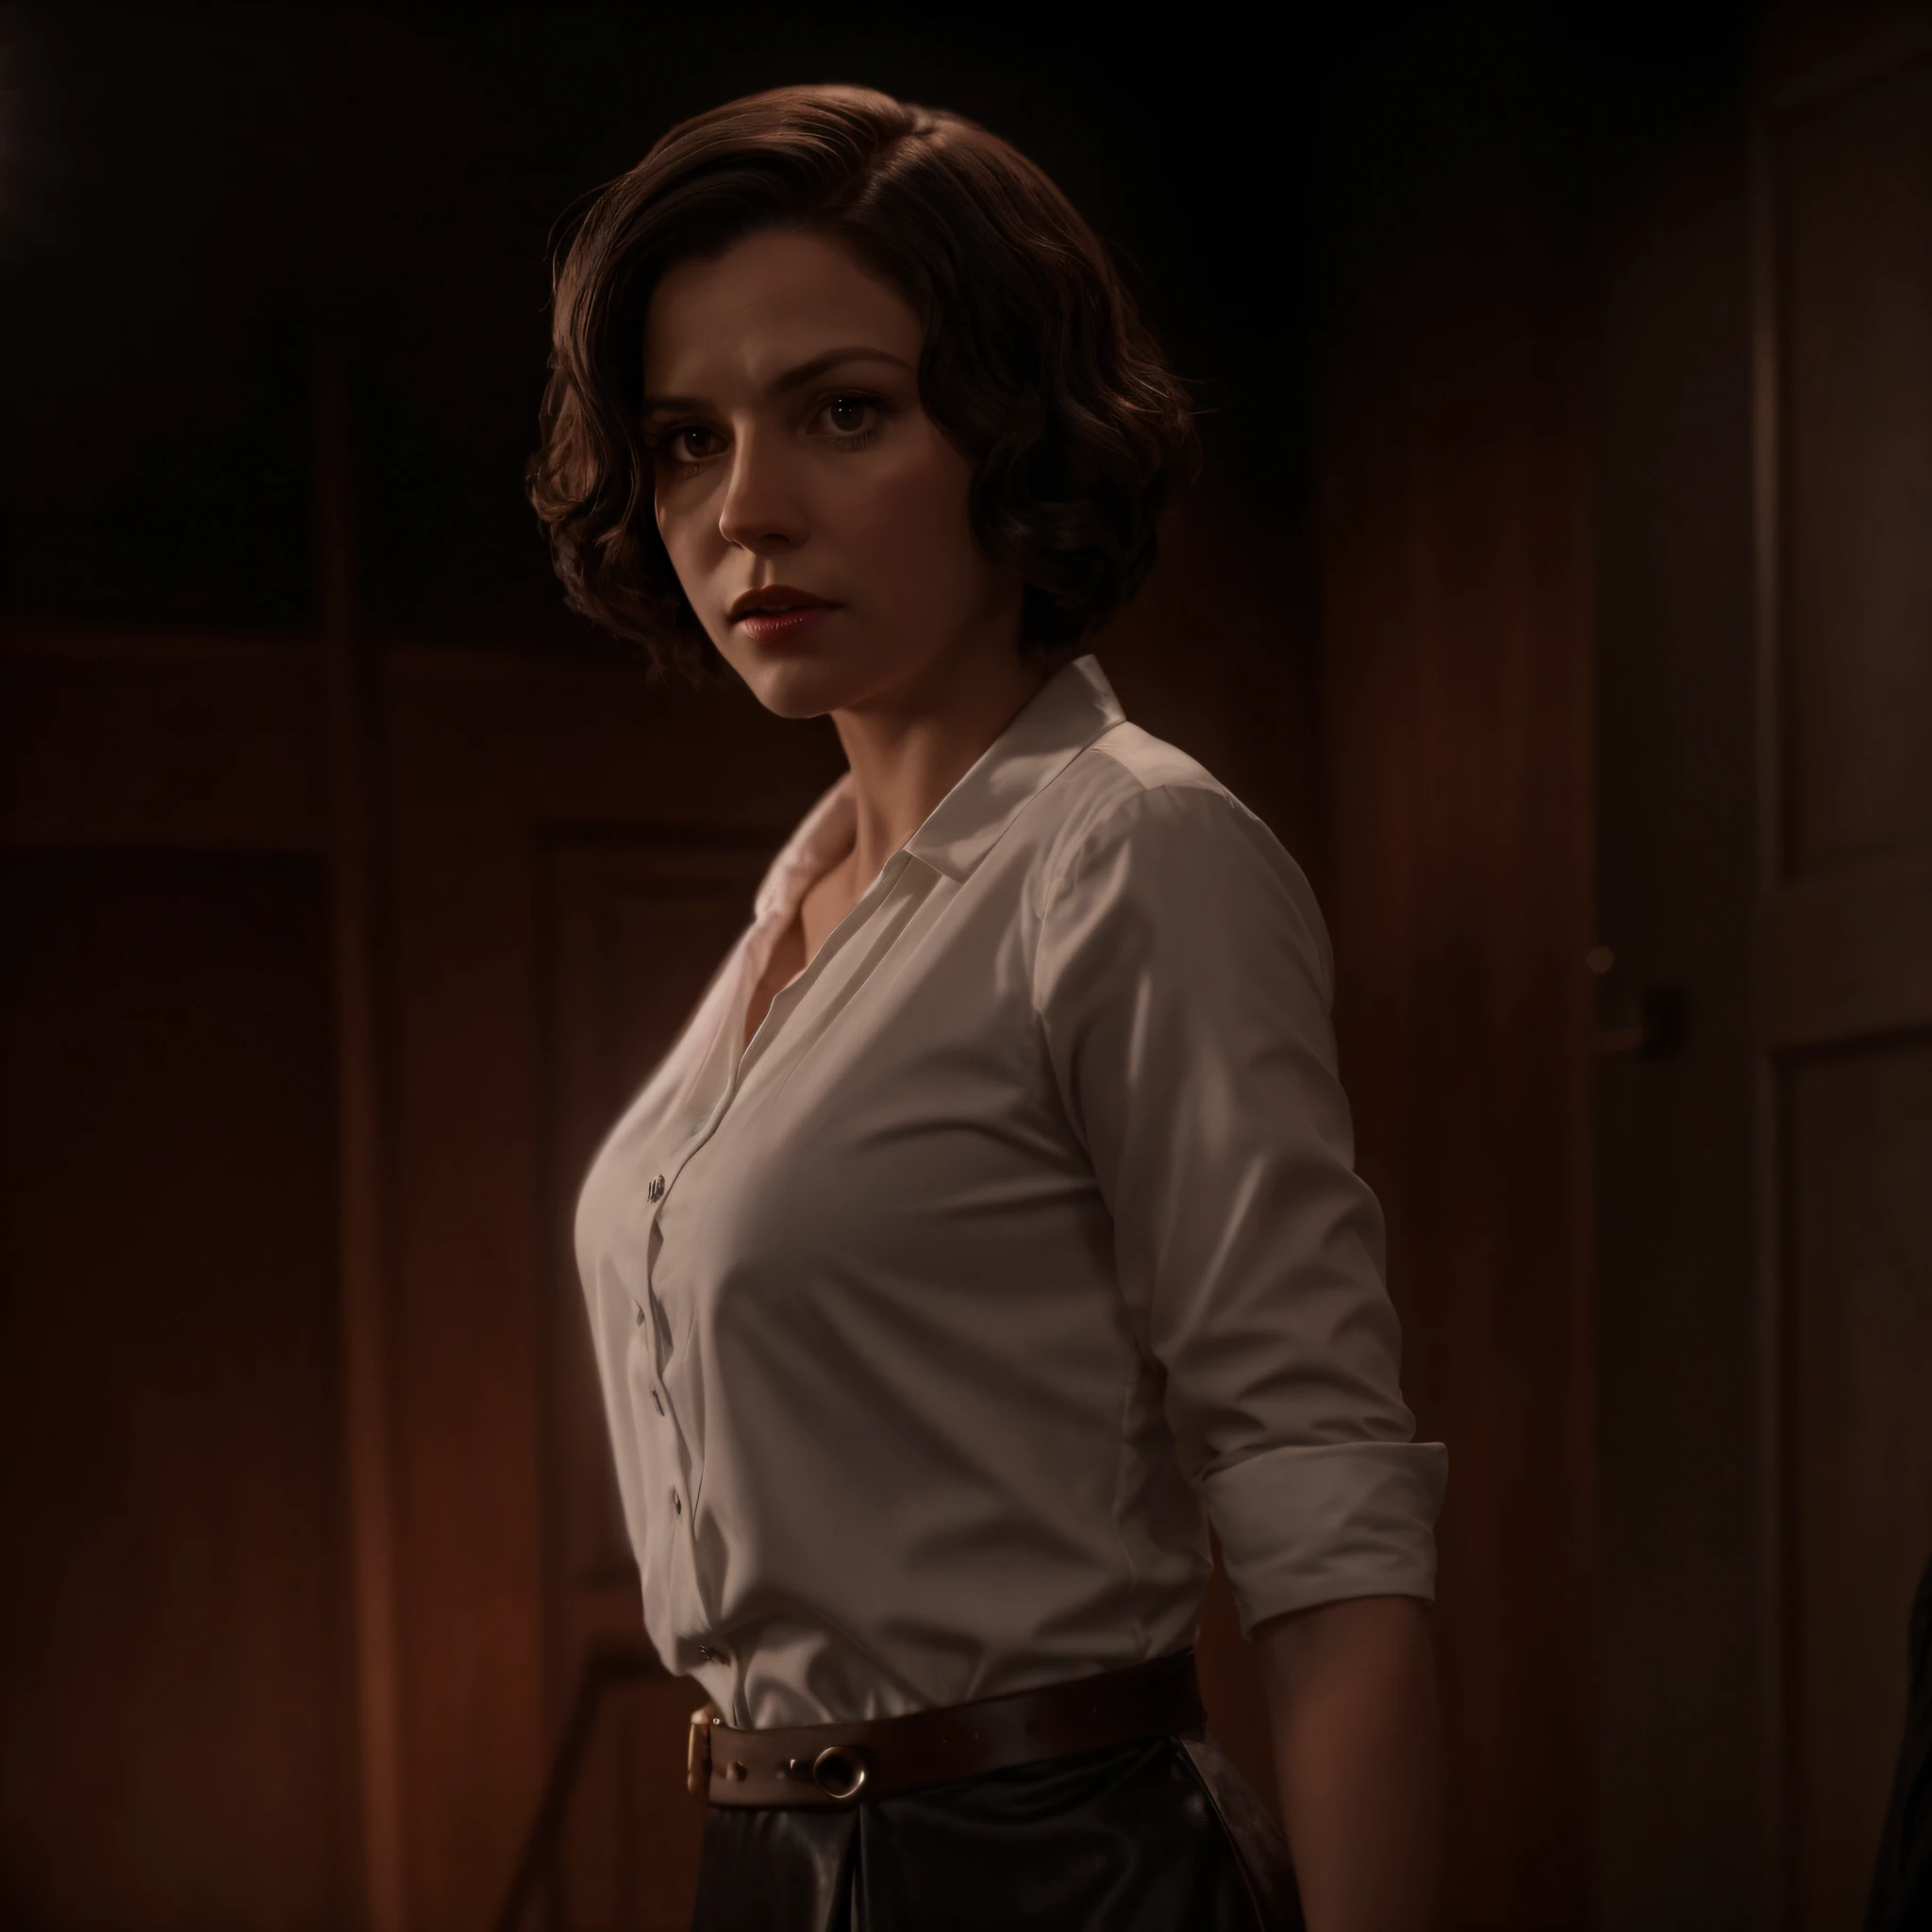 A middle-aged woman around 25 years old wearing a white shirt and black dress stood in the room， Live-action，Photoreal，《Mafia 1》Sarah in the remake，Belpopa，《god father》Kay Adams，Diane Keaton when he was young，Elizabeth is in BioShock Infinite, heroines, cinematic soft lighting, good cinematic lighting, Inspired by Ida Gladys Killings, Cinematic top lighting, Moody dim light, highly detailed soft lighting, realistic soft lighting, With cinematic lighting, gorgeous cinematic lighting, beautiful cinematic light, great cinematic lighting，best qualtiy